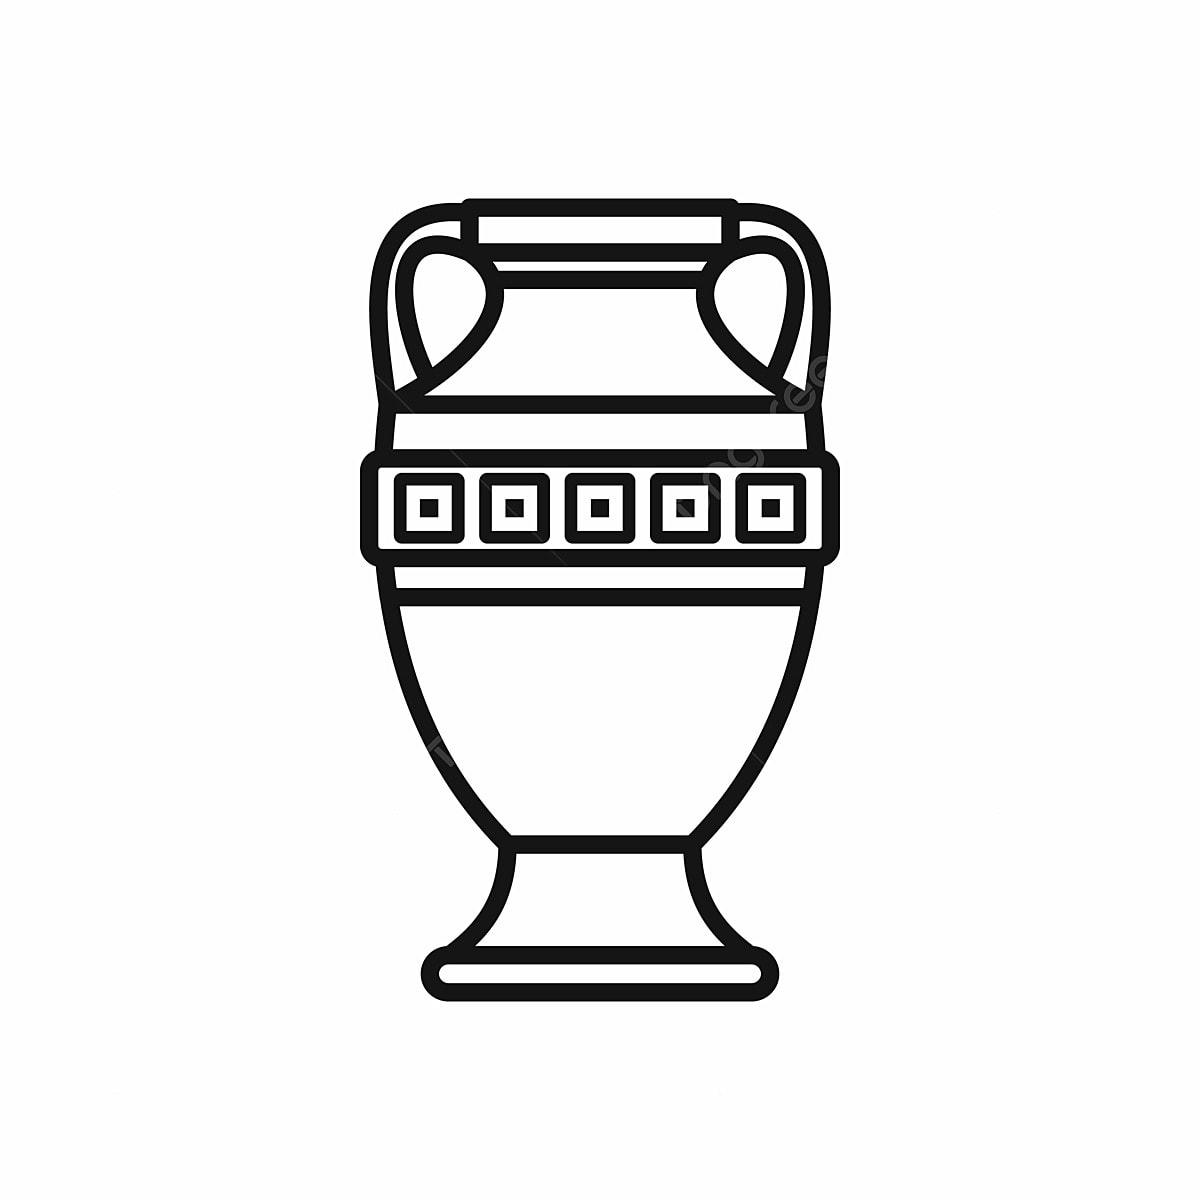 pngtree-ancient-vase-icon-outline-style-png-image_5150225.jpg